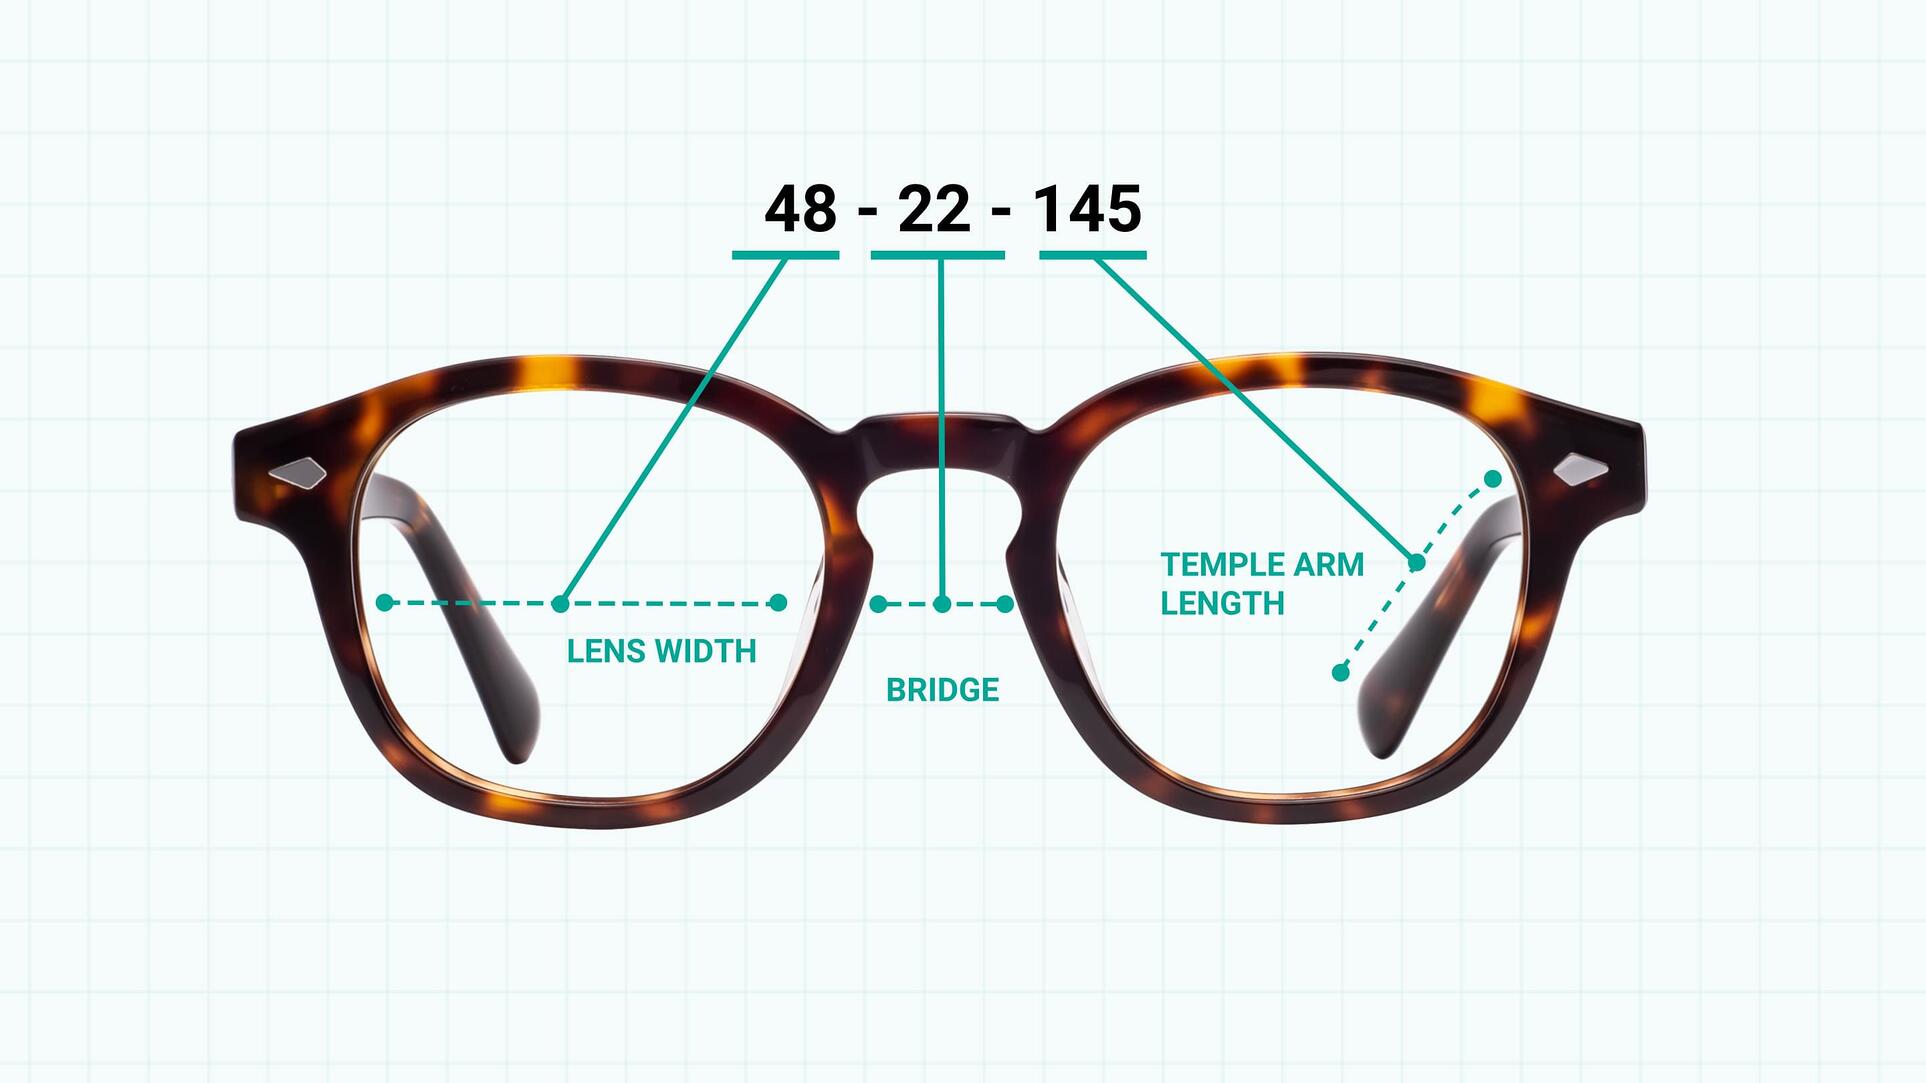 Glasses measurements are essential to helping you see clearly and comfortably.